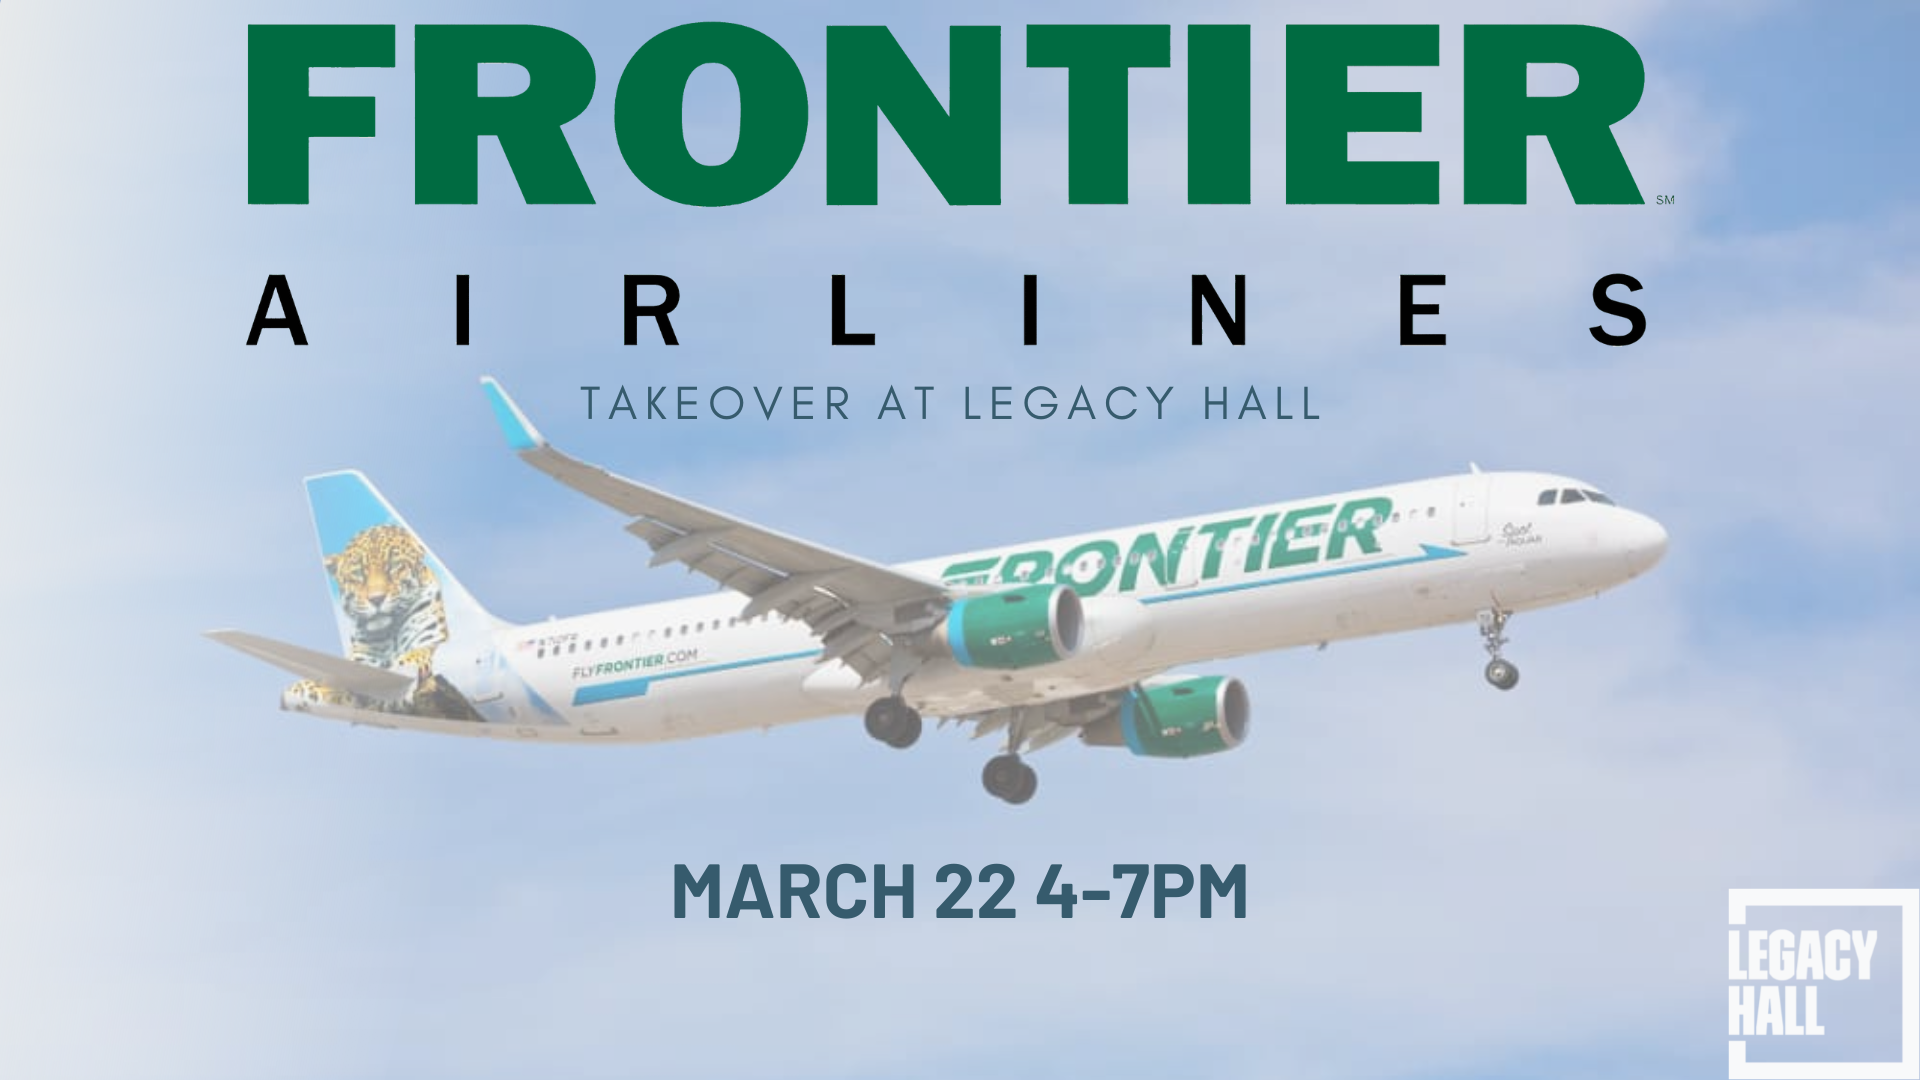 Frontier Airline Takeover - hero